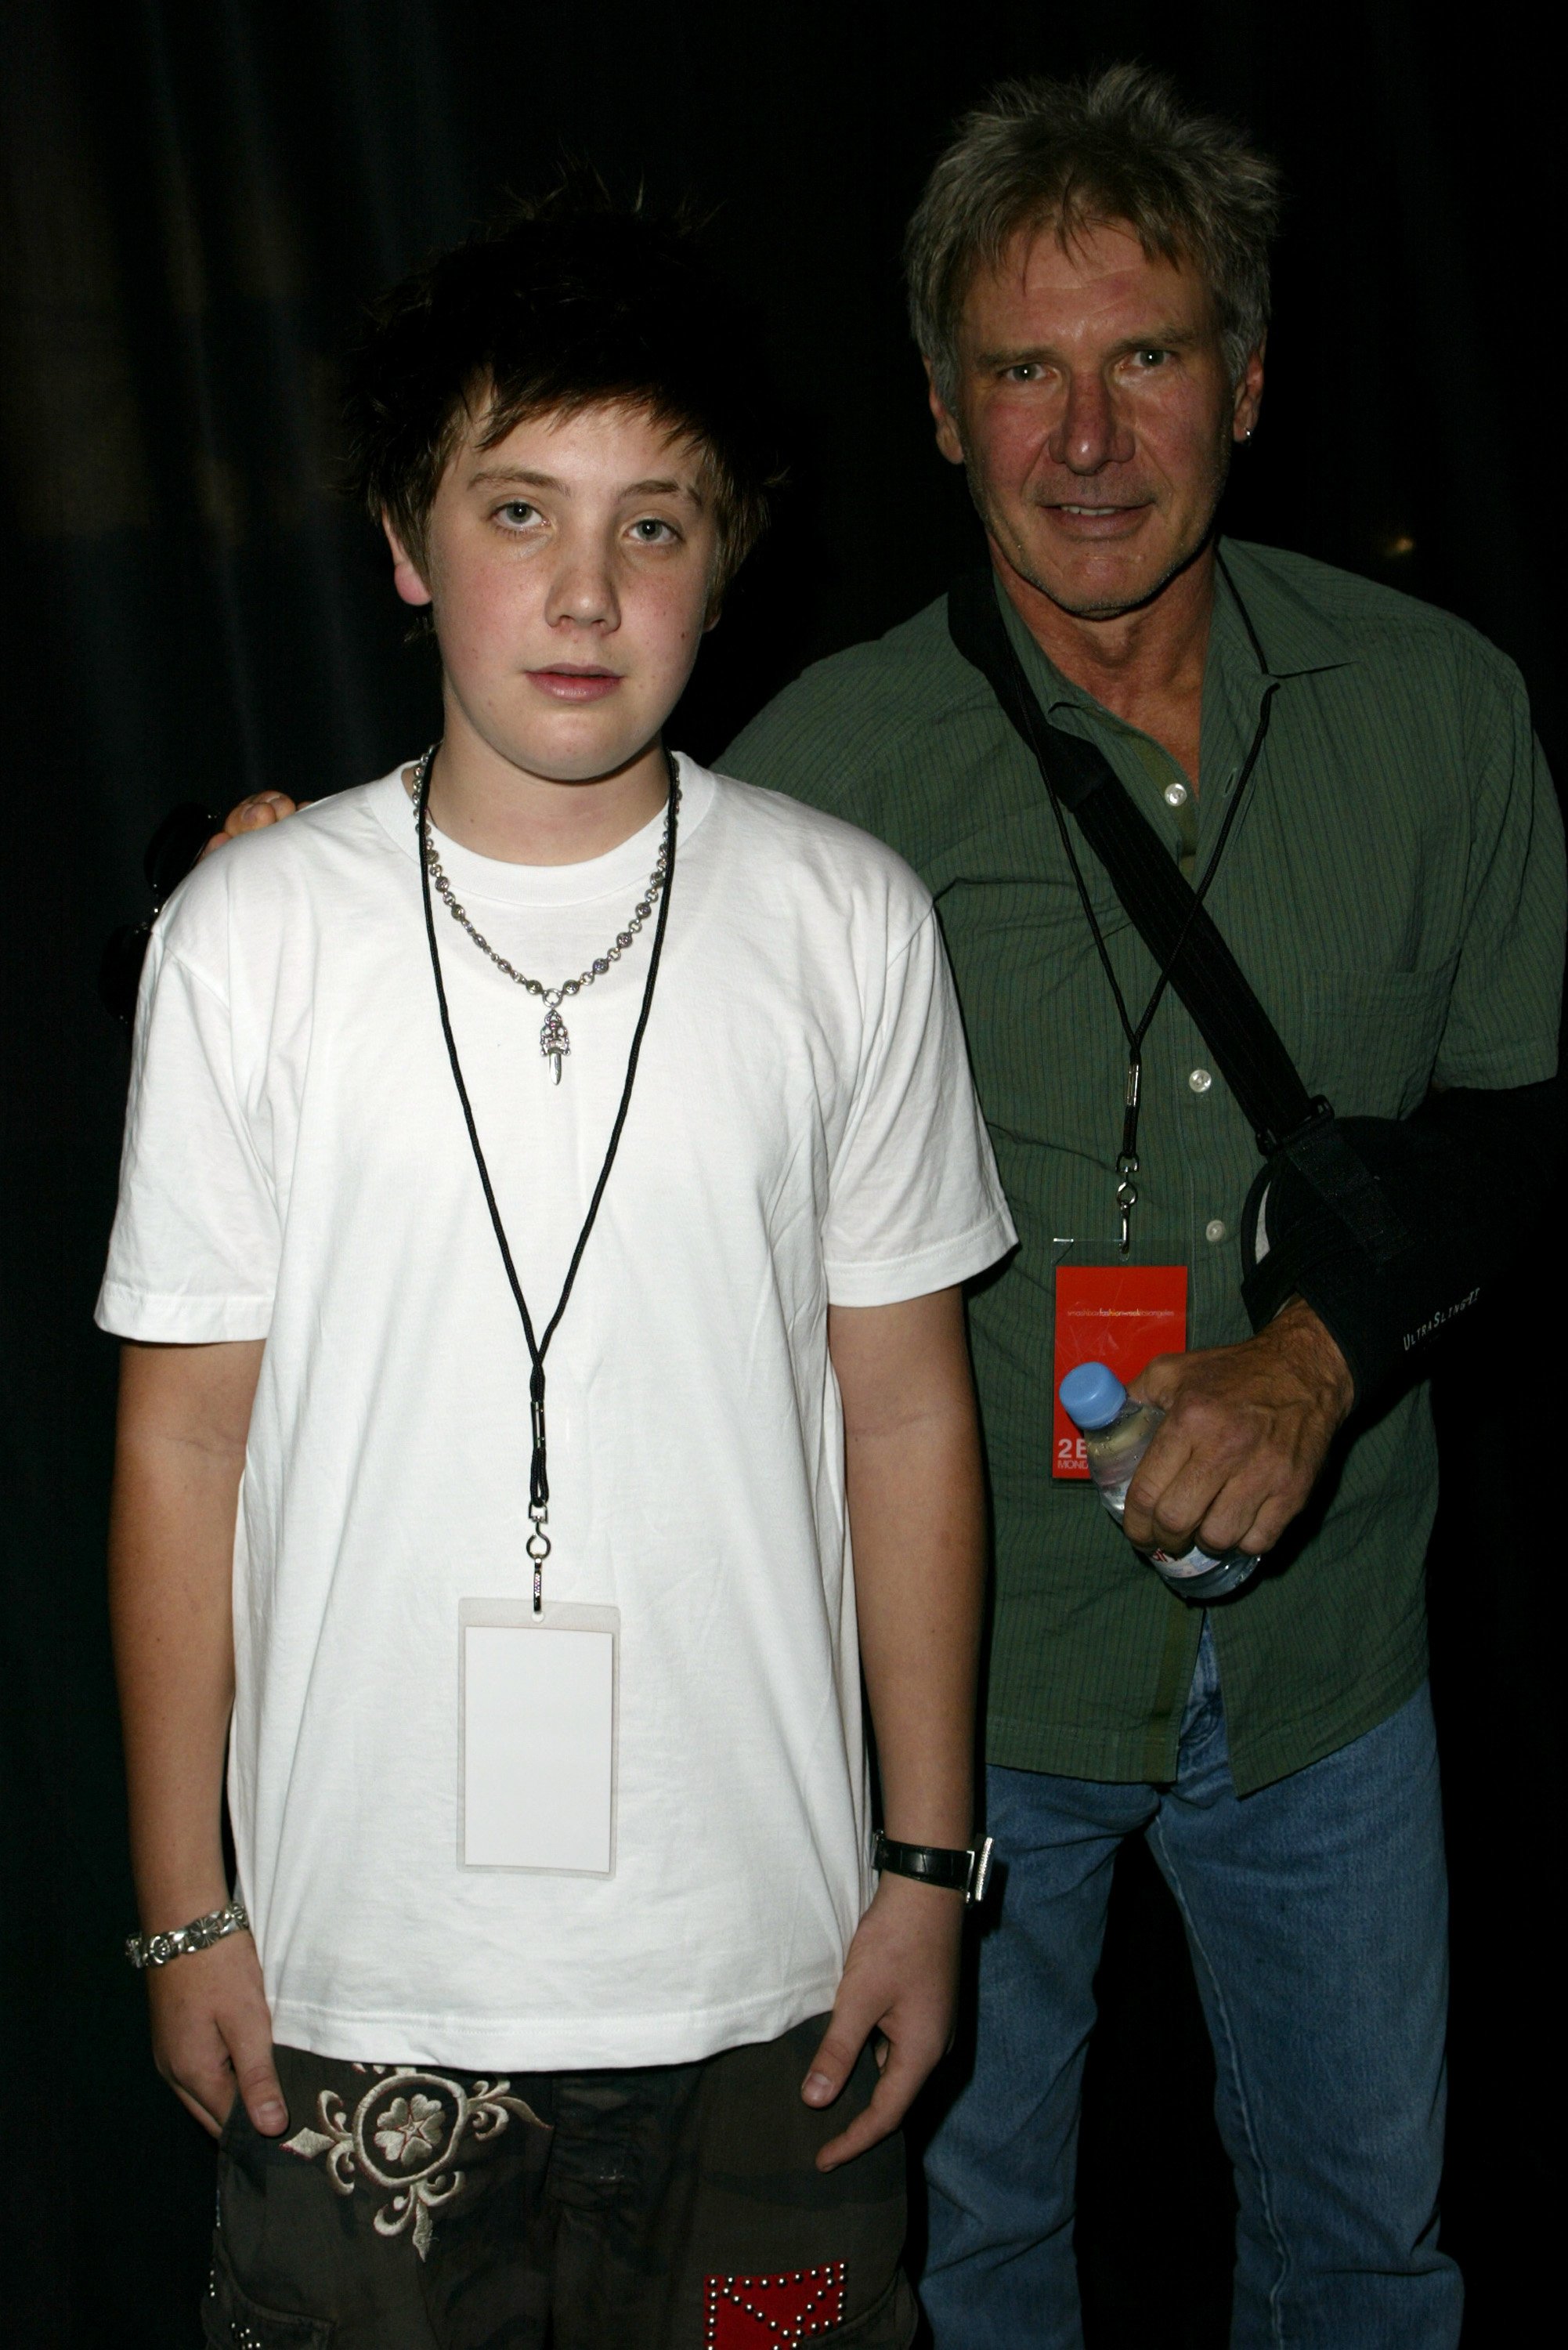 Malcolm Ford and Harrison Ford attend the 2003 Smashbox Fashion Week at the Smashbox Studios on October 27, 2003, in Culver City, California. | Source: Getty Images